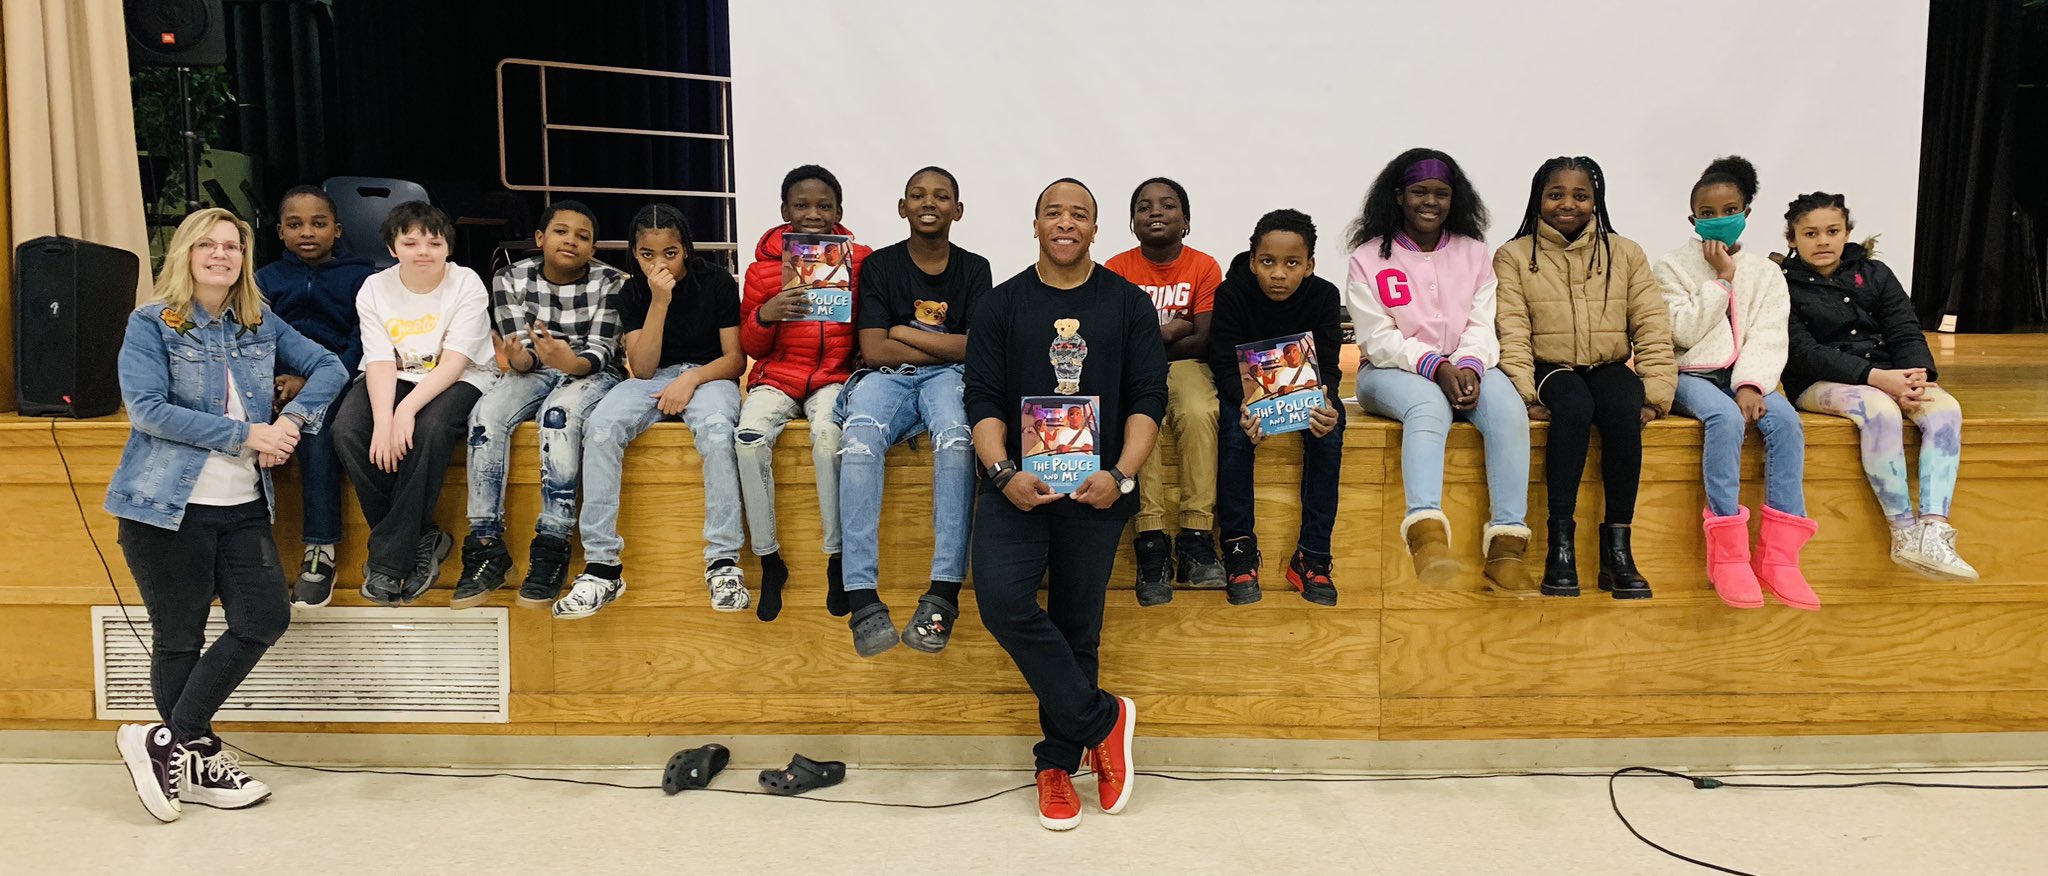 This is a photo of a group of 5th grade students, sitting on the edge of their school stage, with author Derrick Dotson in the center, smiling at the camera.